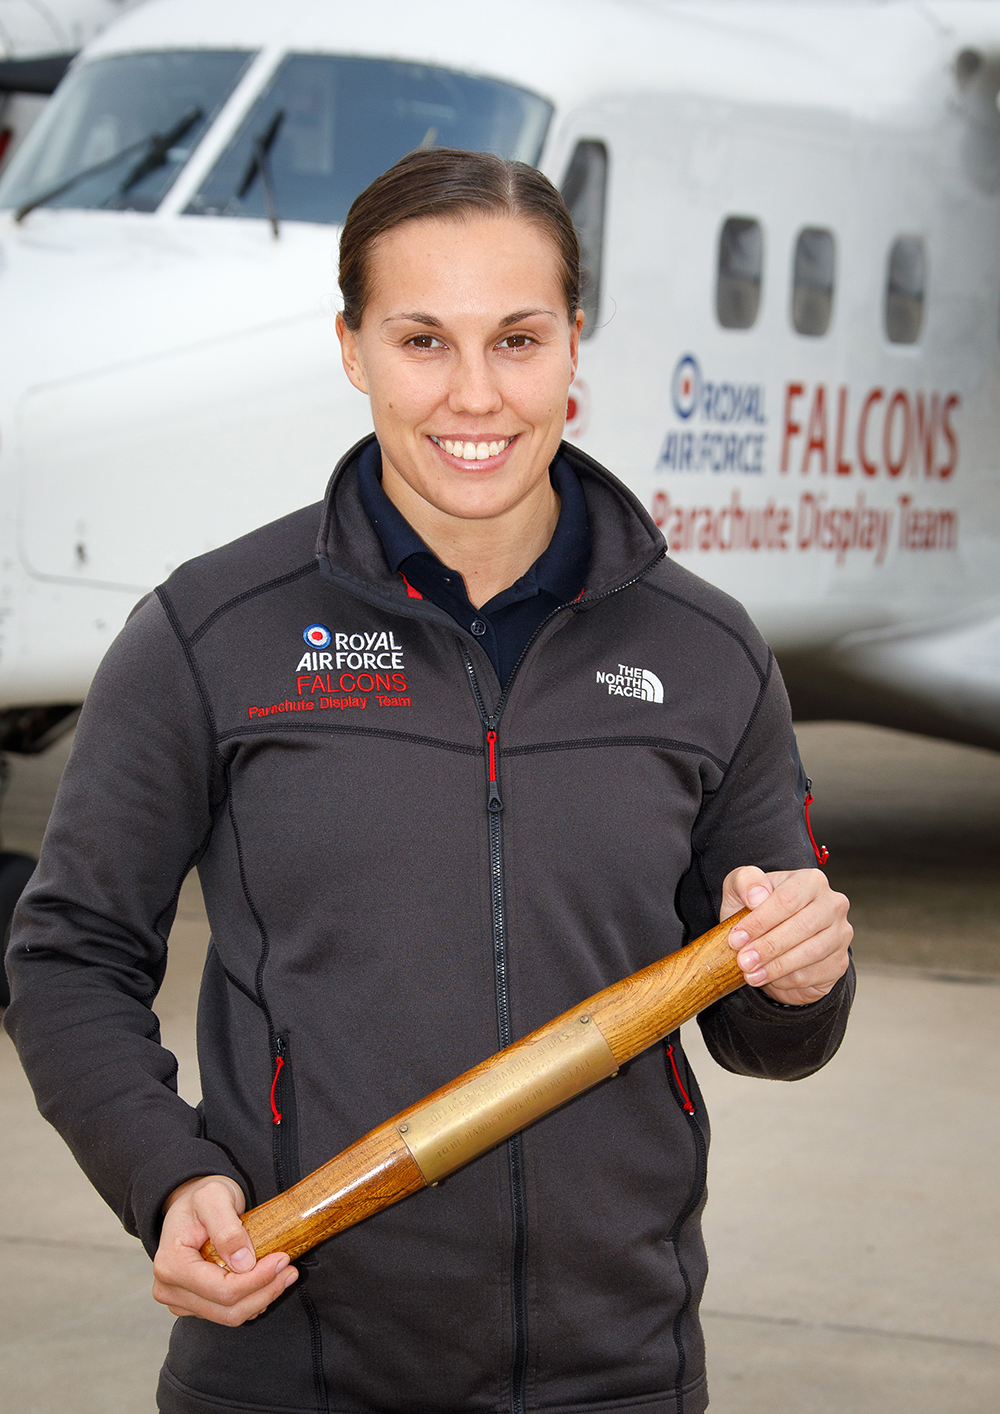 Pictured is the new Officer Commanding the RAF Falcons Parachute Display Team, Flight Lieutenant Mikaela Harrison